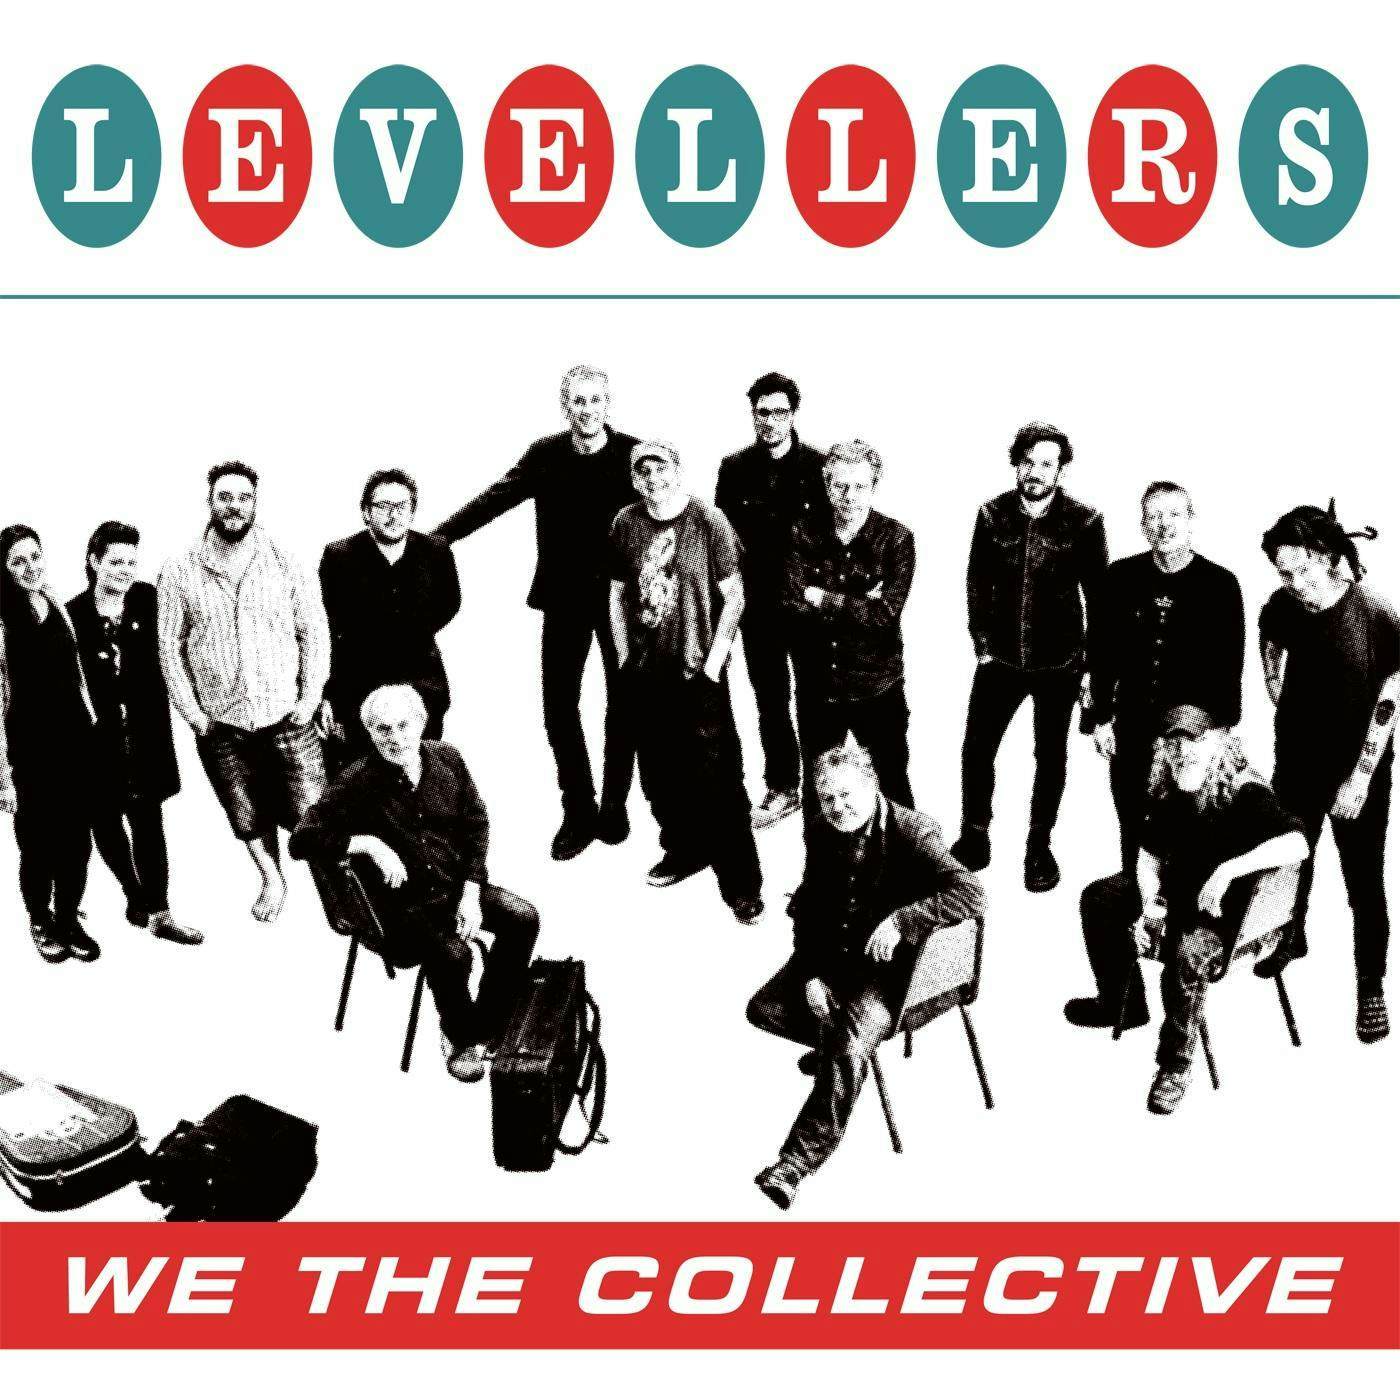 Levellers We The Collective Vinyl Record